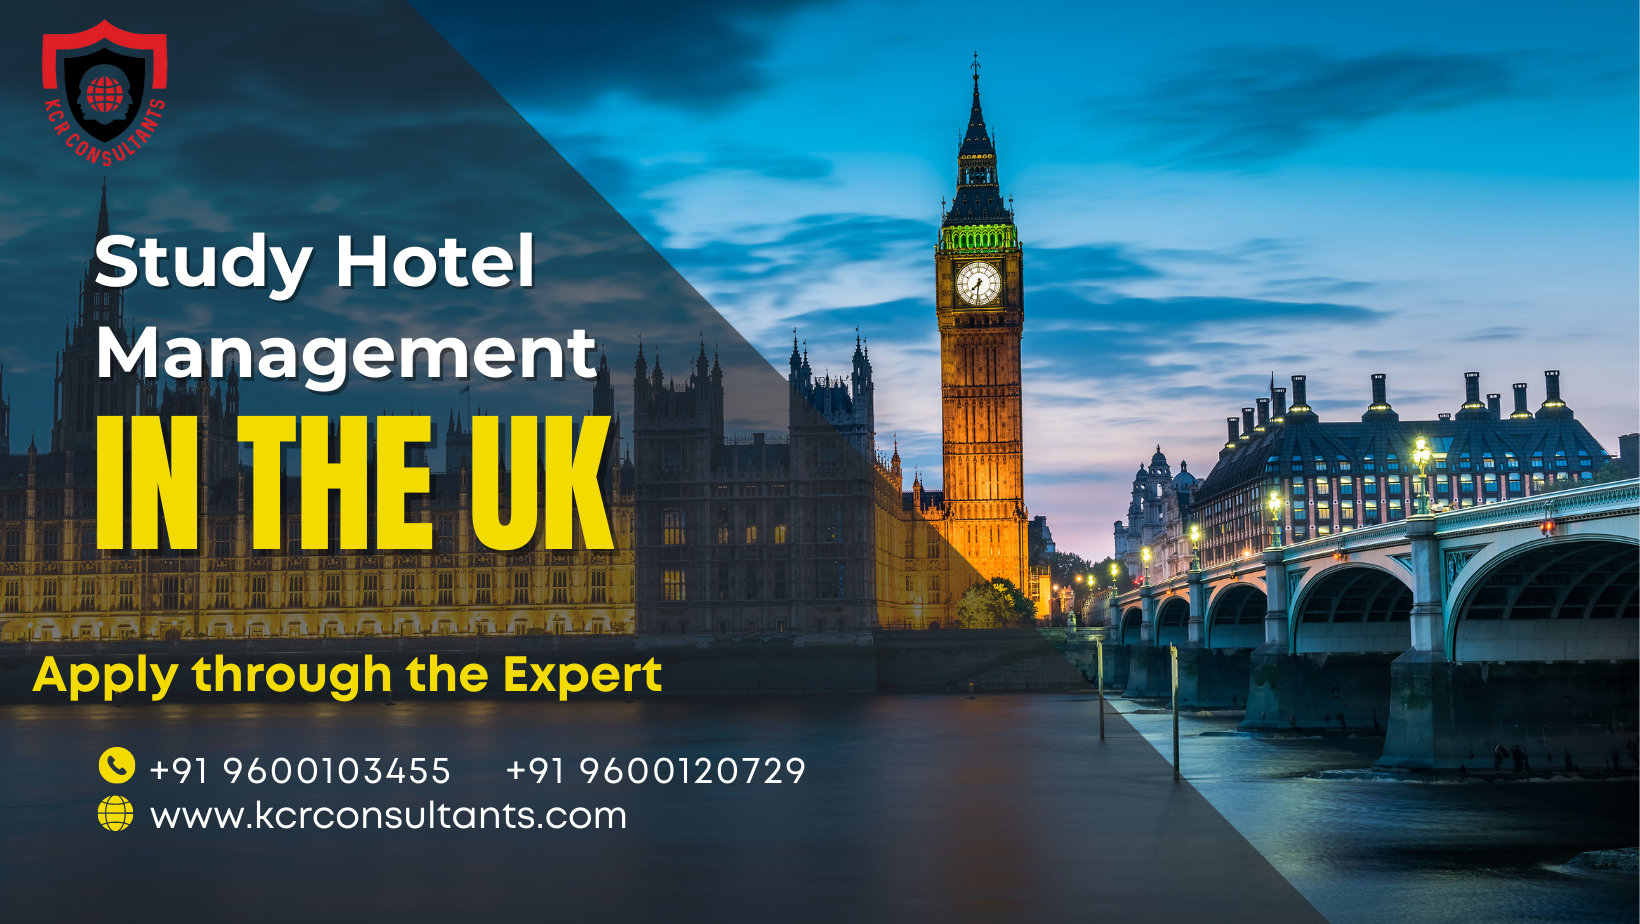 Study Hotel Management in the UK KCR